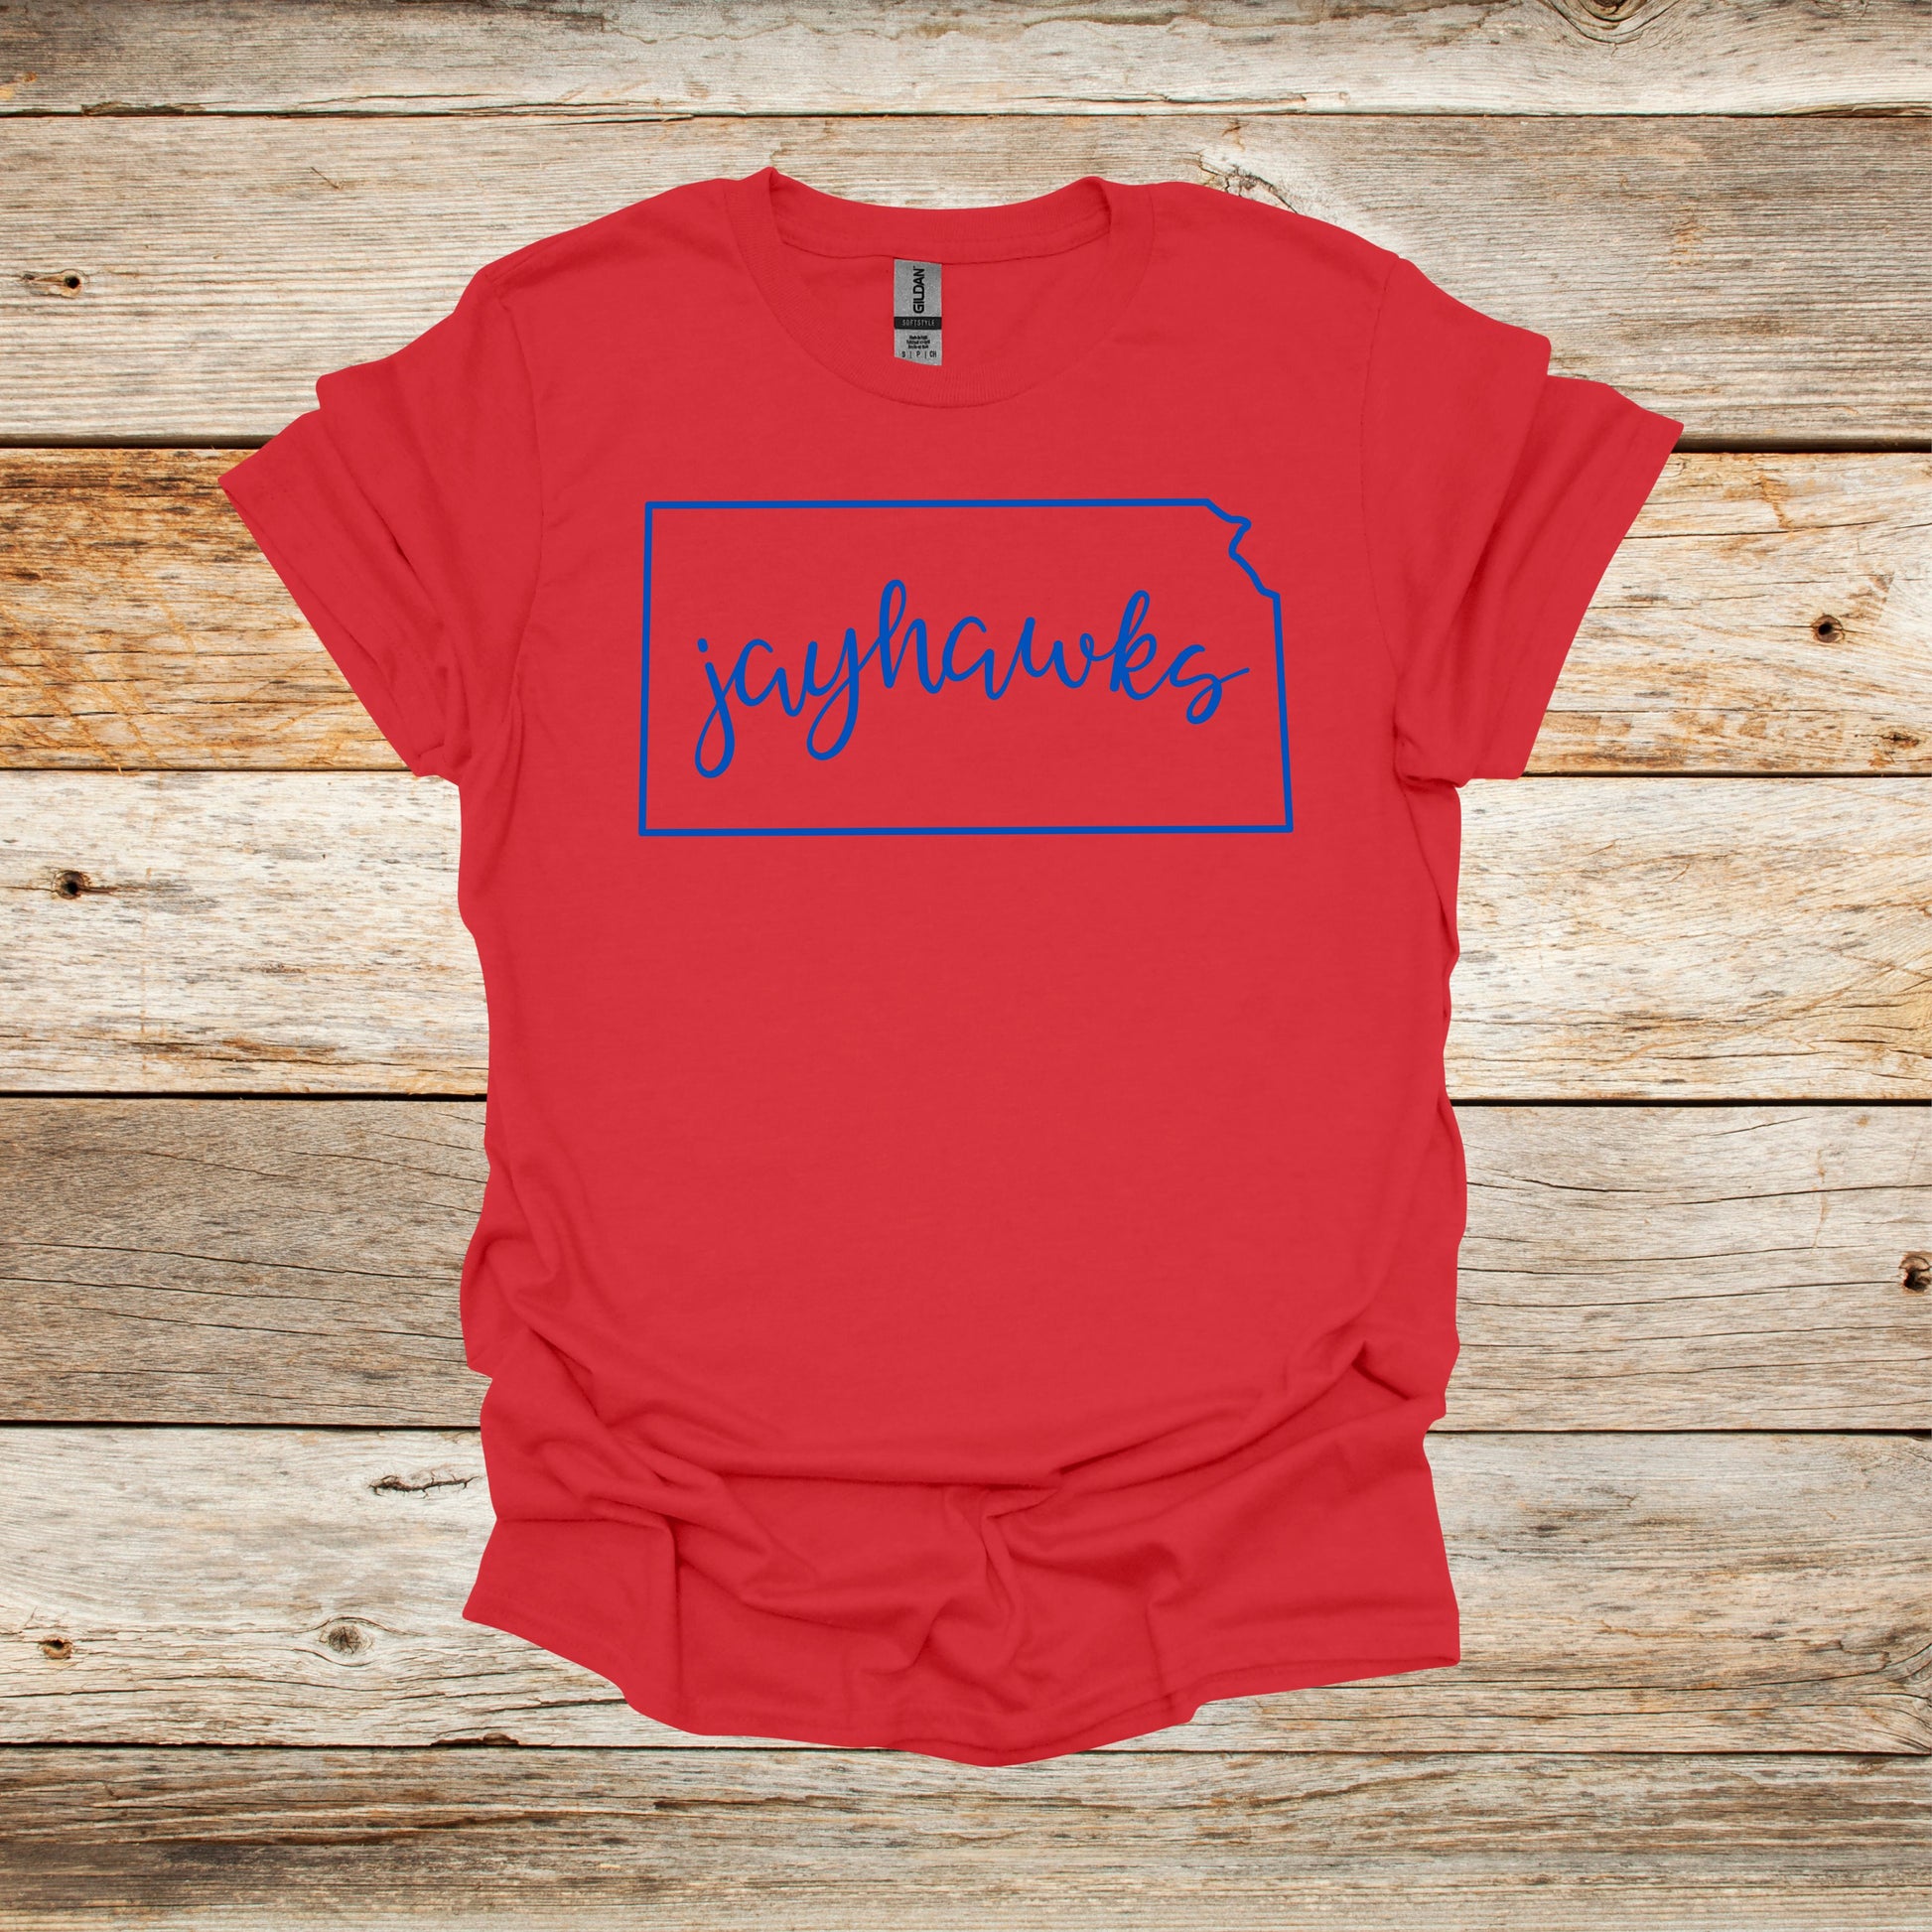 College T Shirt - Kansas Jayhawks - State Outline - Adult and Children's Tee Shirts T-Shirts Graphic Avenue Red Adult Small 